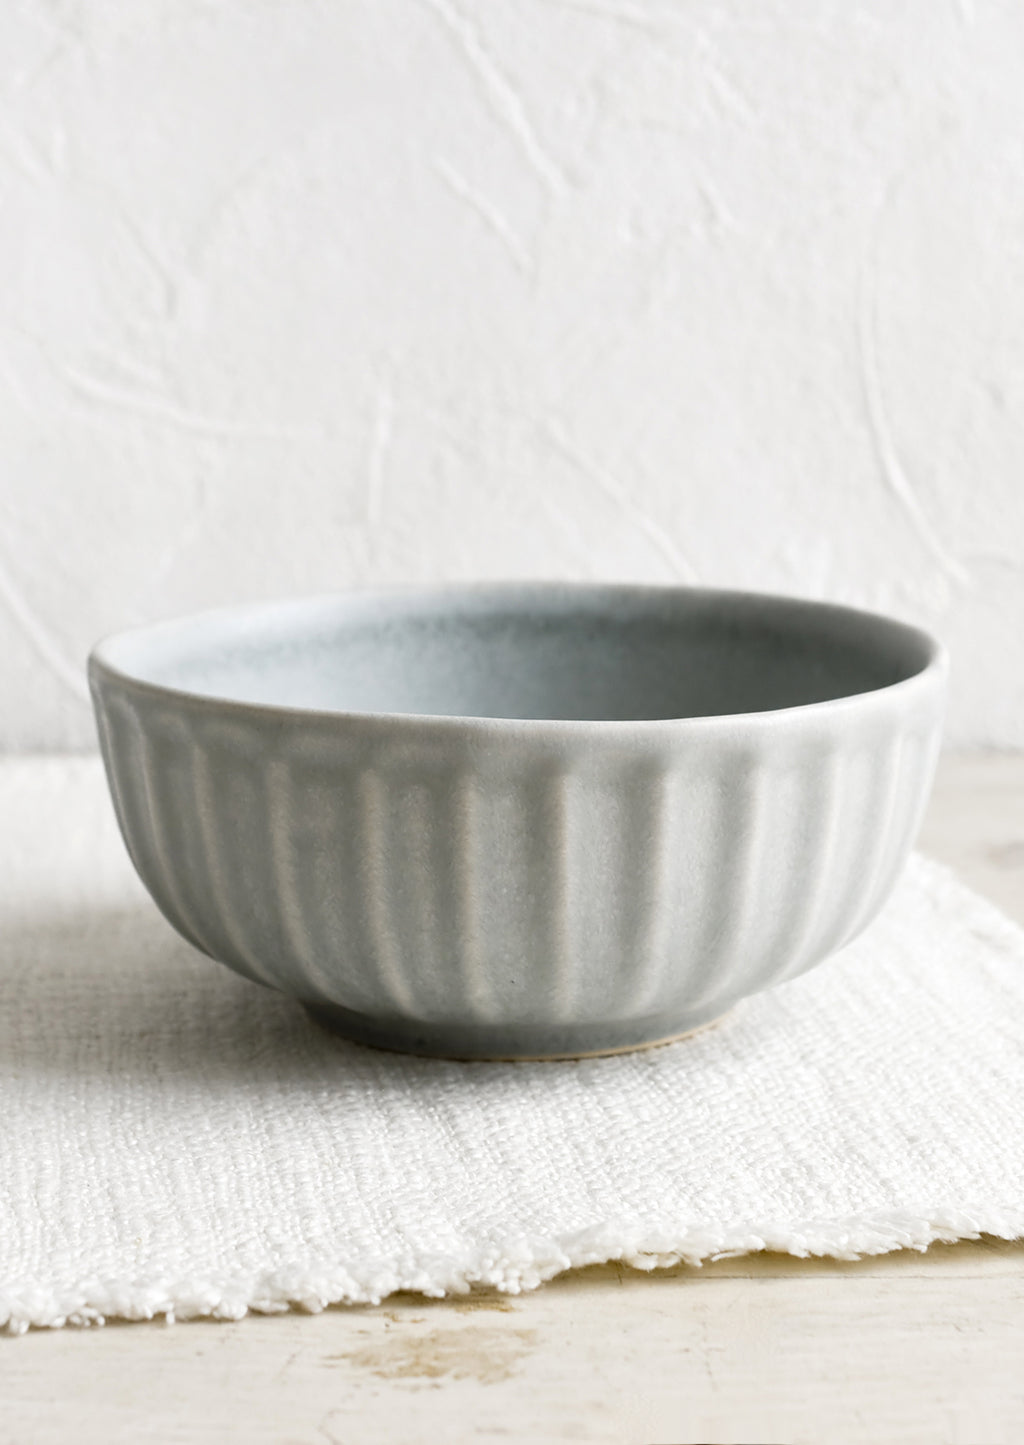 Soup Bowl: A round ceramic soup bowl with fluted texture.